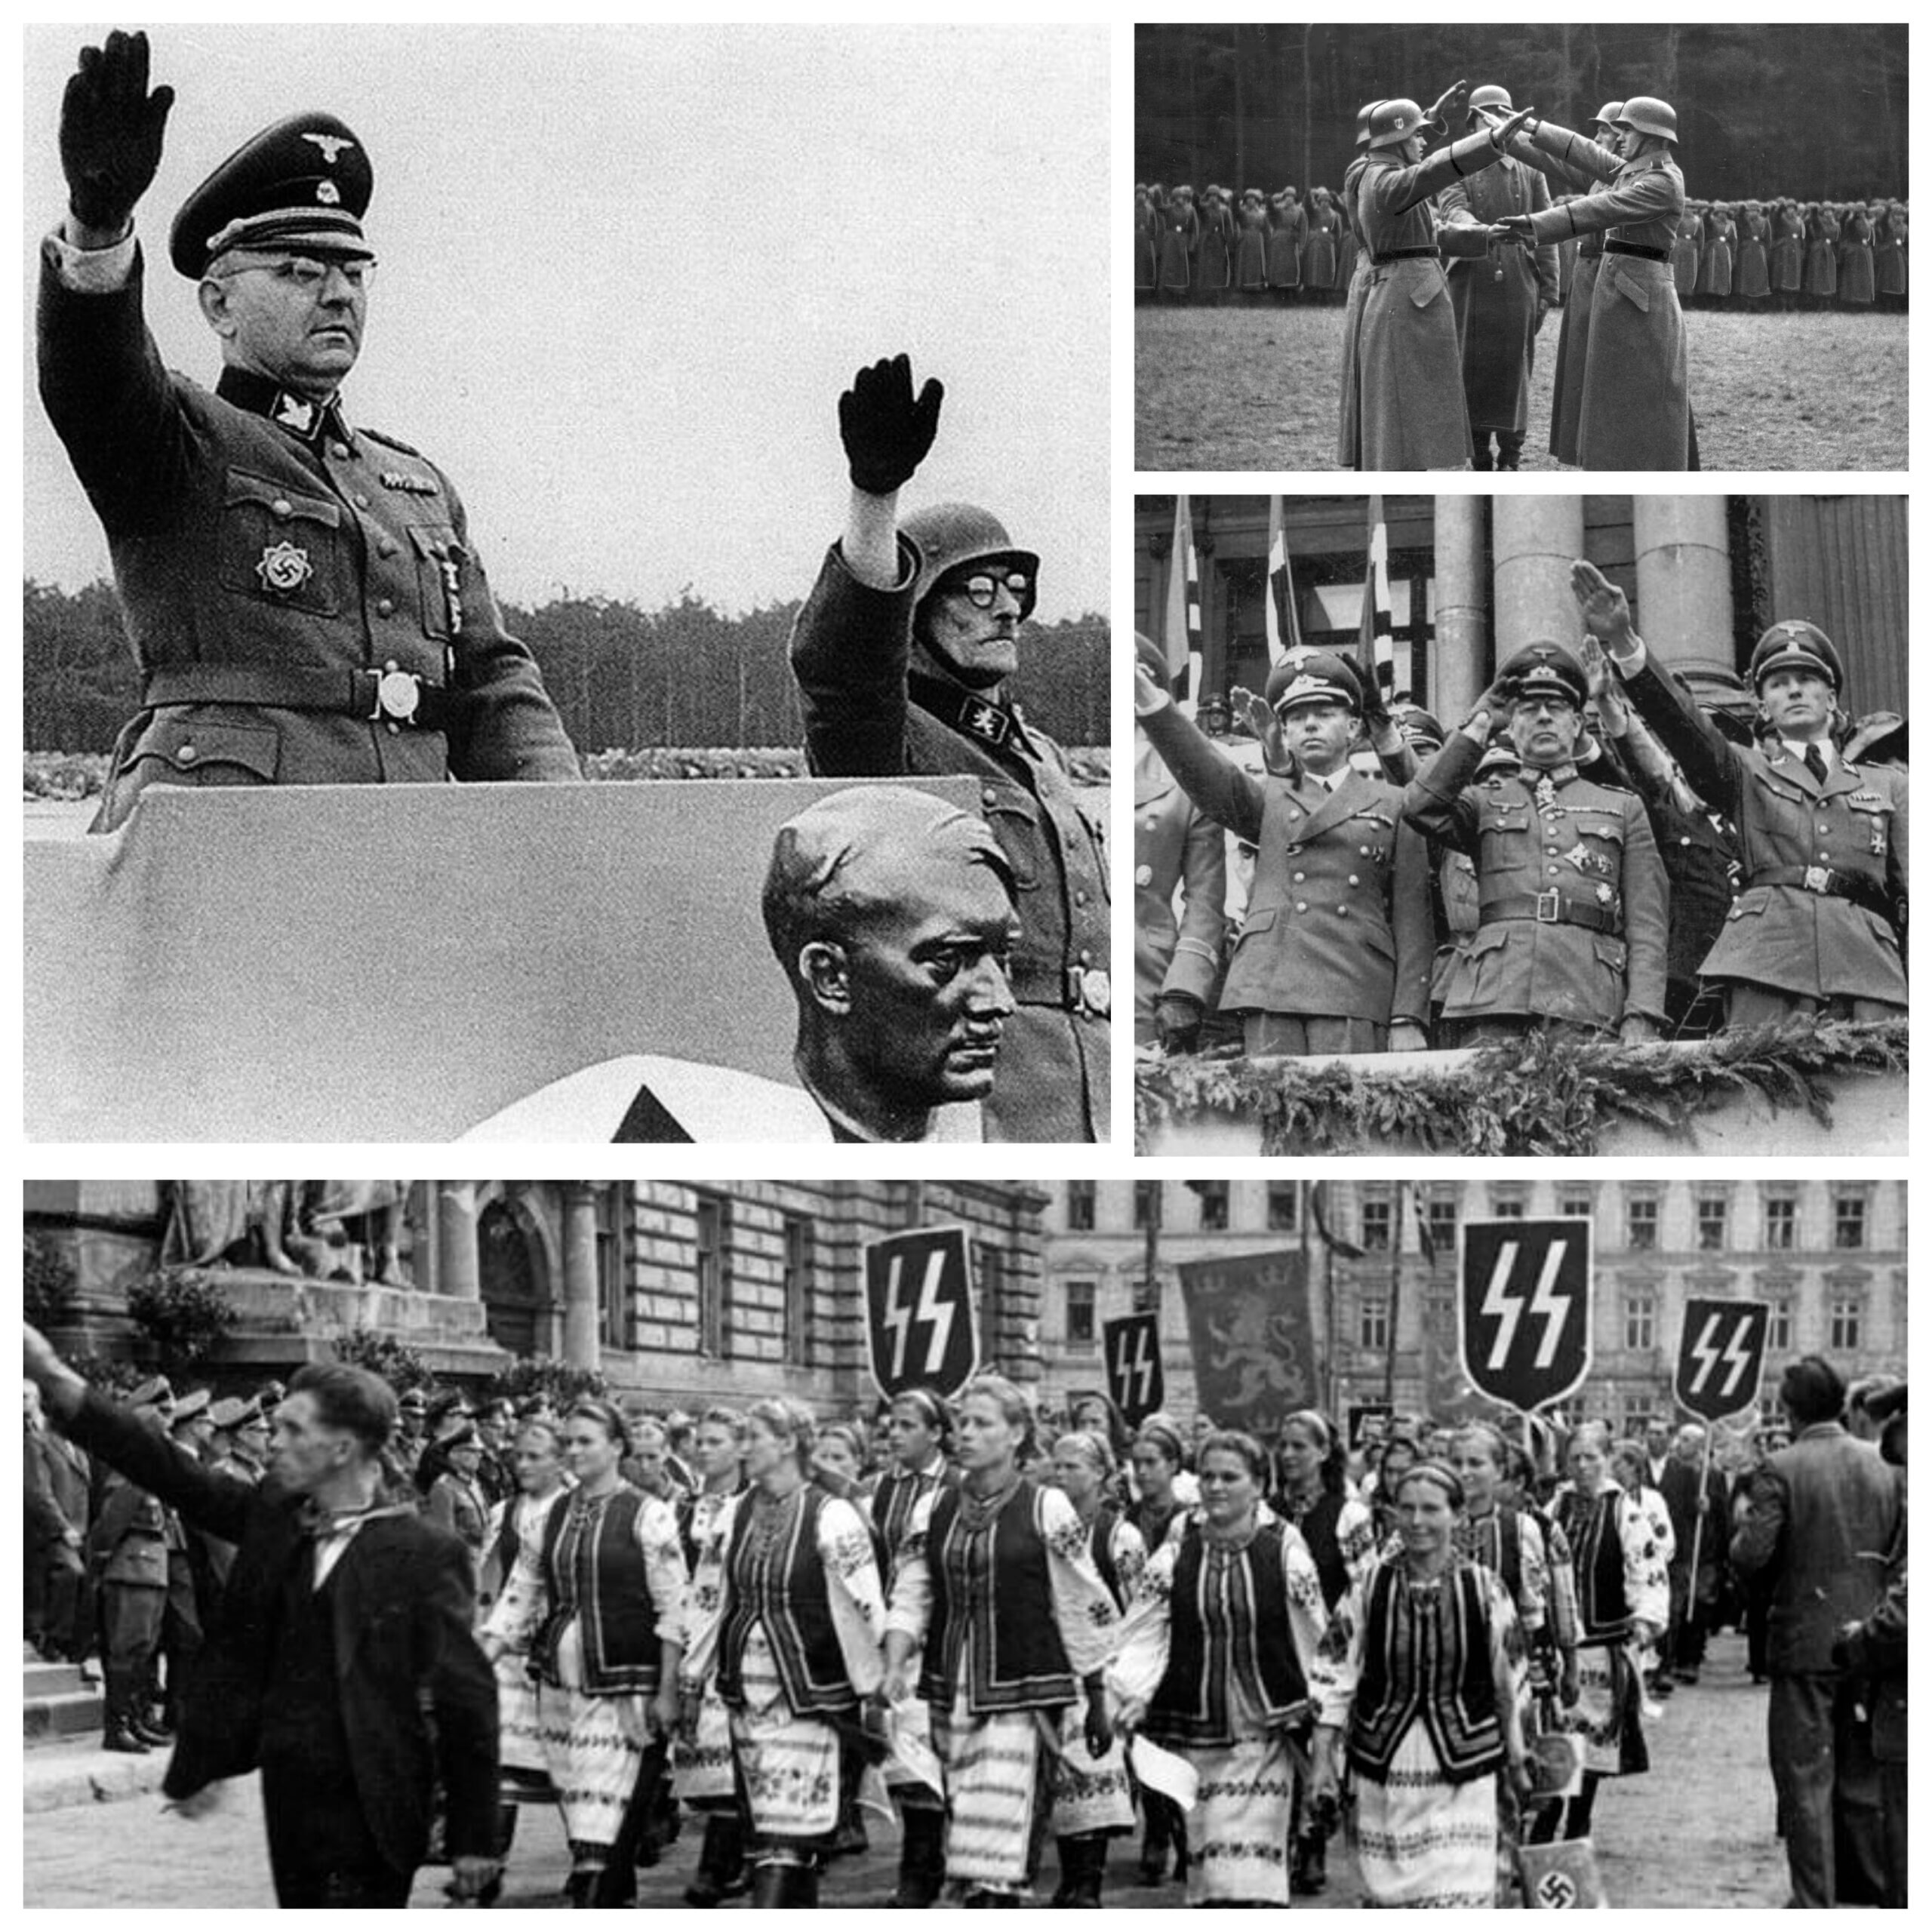 Top left: Cremony held by the 14th Waffen Grenadier Division of the SS Galichina with commander SS-Brigadeführer Fritz Freitag (left) and division cofounder SS-Hauptsturmführer Dmytro Paliiv (right); Top right: uniformed SS Galichina troops swearing oath. Middle right: Nazi brass including Fritz Freitag (middle) and SS-Gruppenführer Otto Wächter (right) reviewing a parade celebrating SS Galichina recruits about to ship out for training, L'viv, July 16, 1943. Wächter, who played an instrumental role in creating SS Galichina, was intimately involved in perpetrating the Holocaust. Bottom: additional L'viv parade footage.